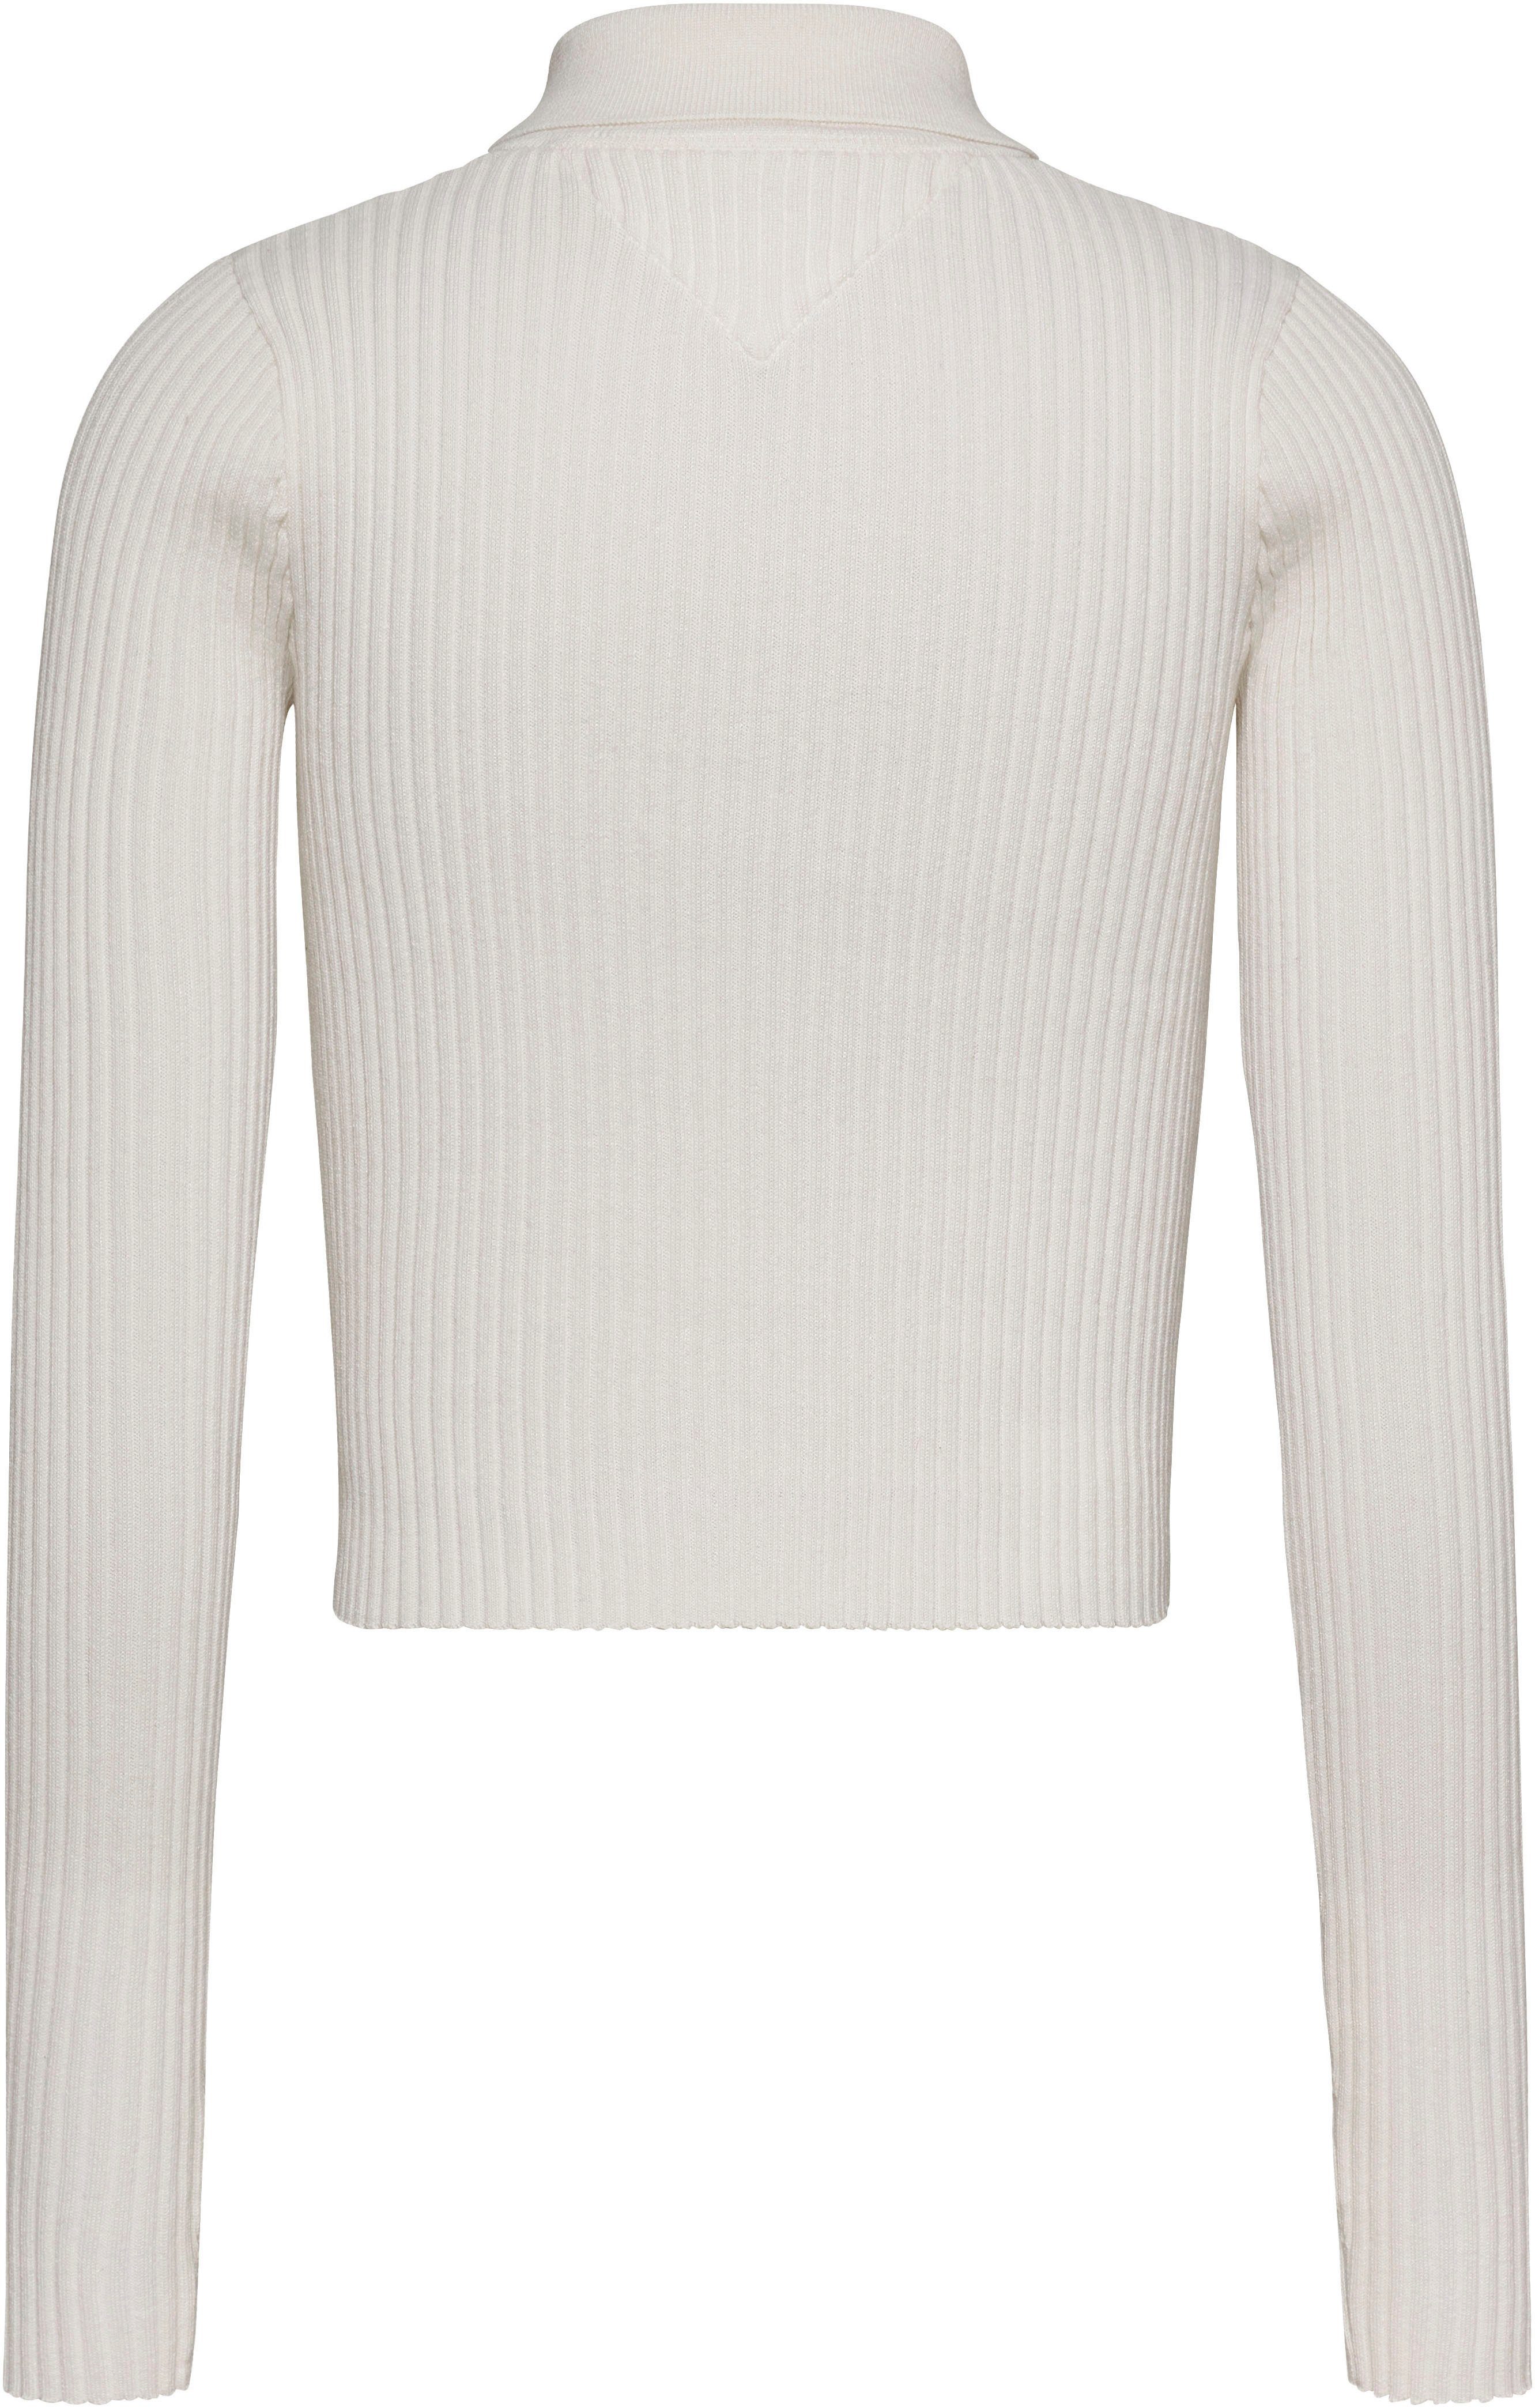 Tommy Jeans Strickpullover mit Markenlabel Jeans weiß Tommy